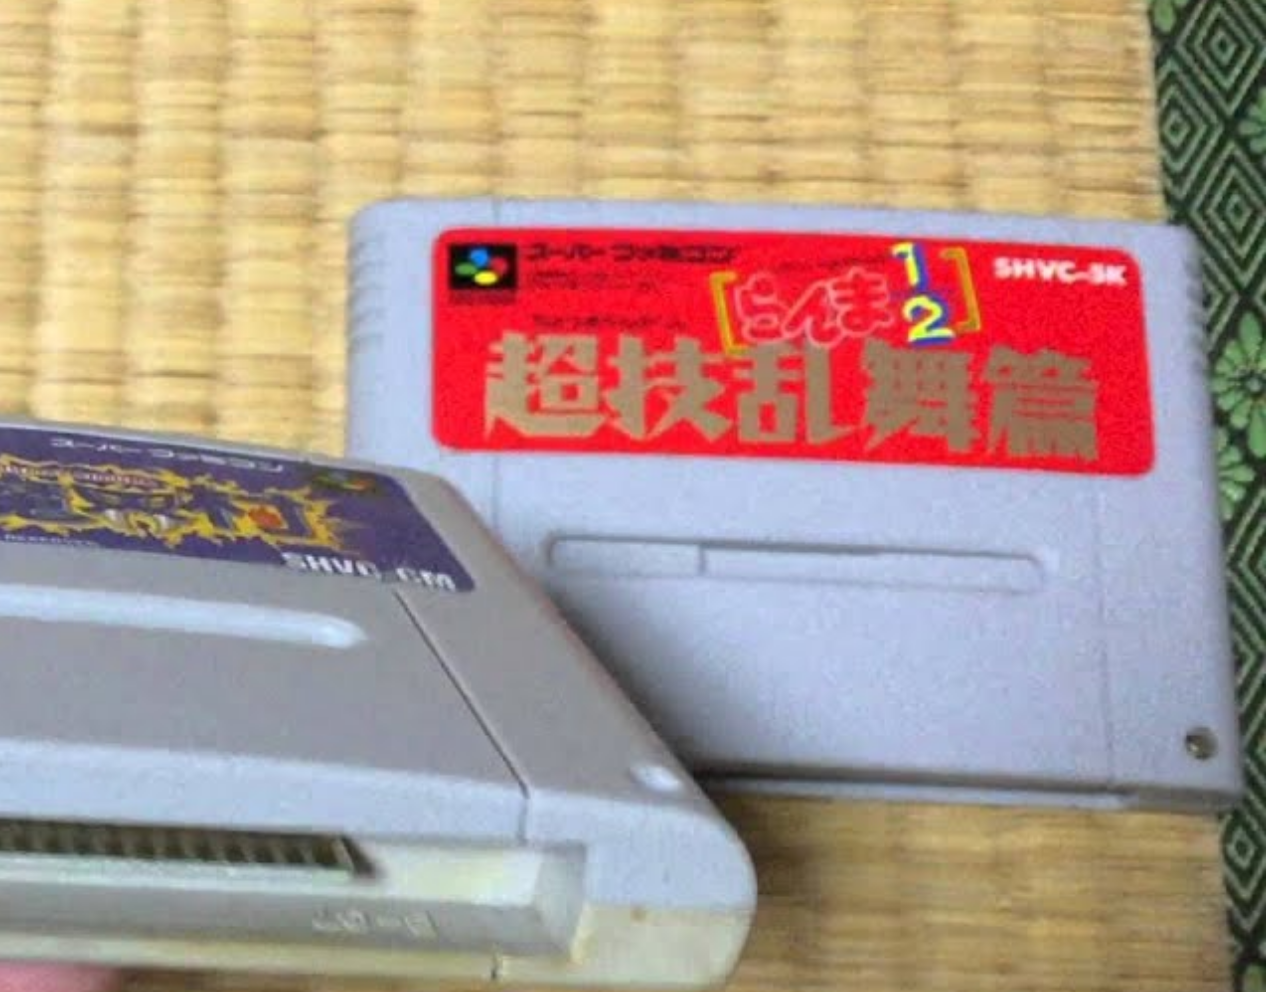 Two Super Famicom games. You can see Ranma on the right, without tabs